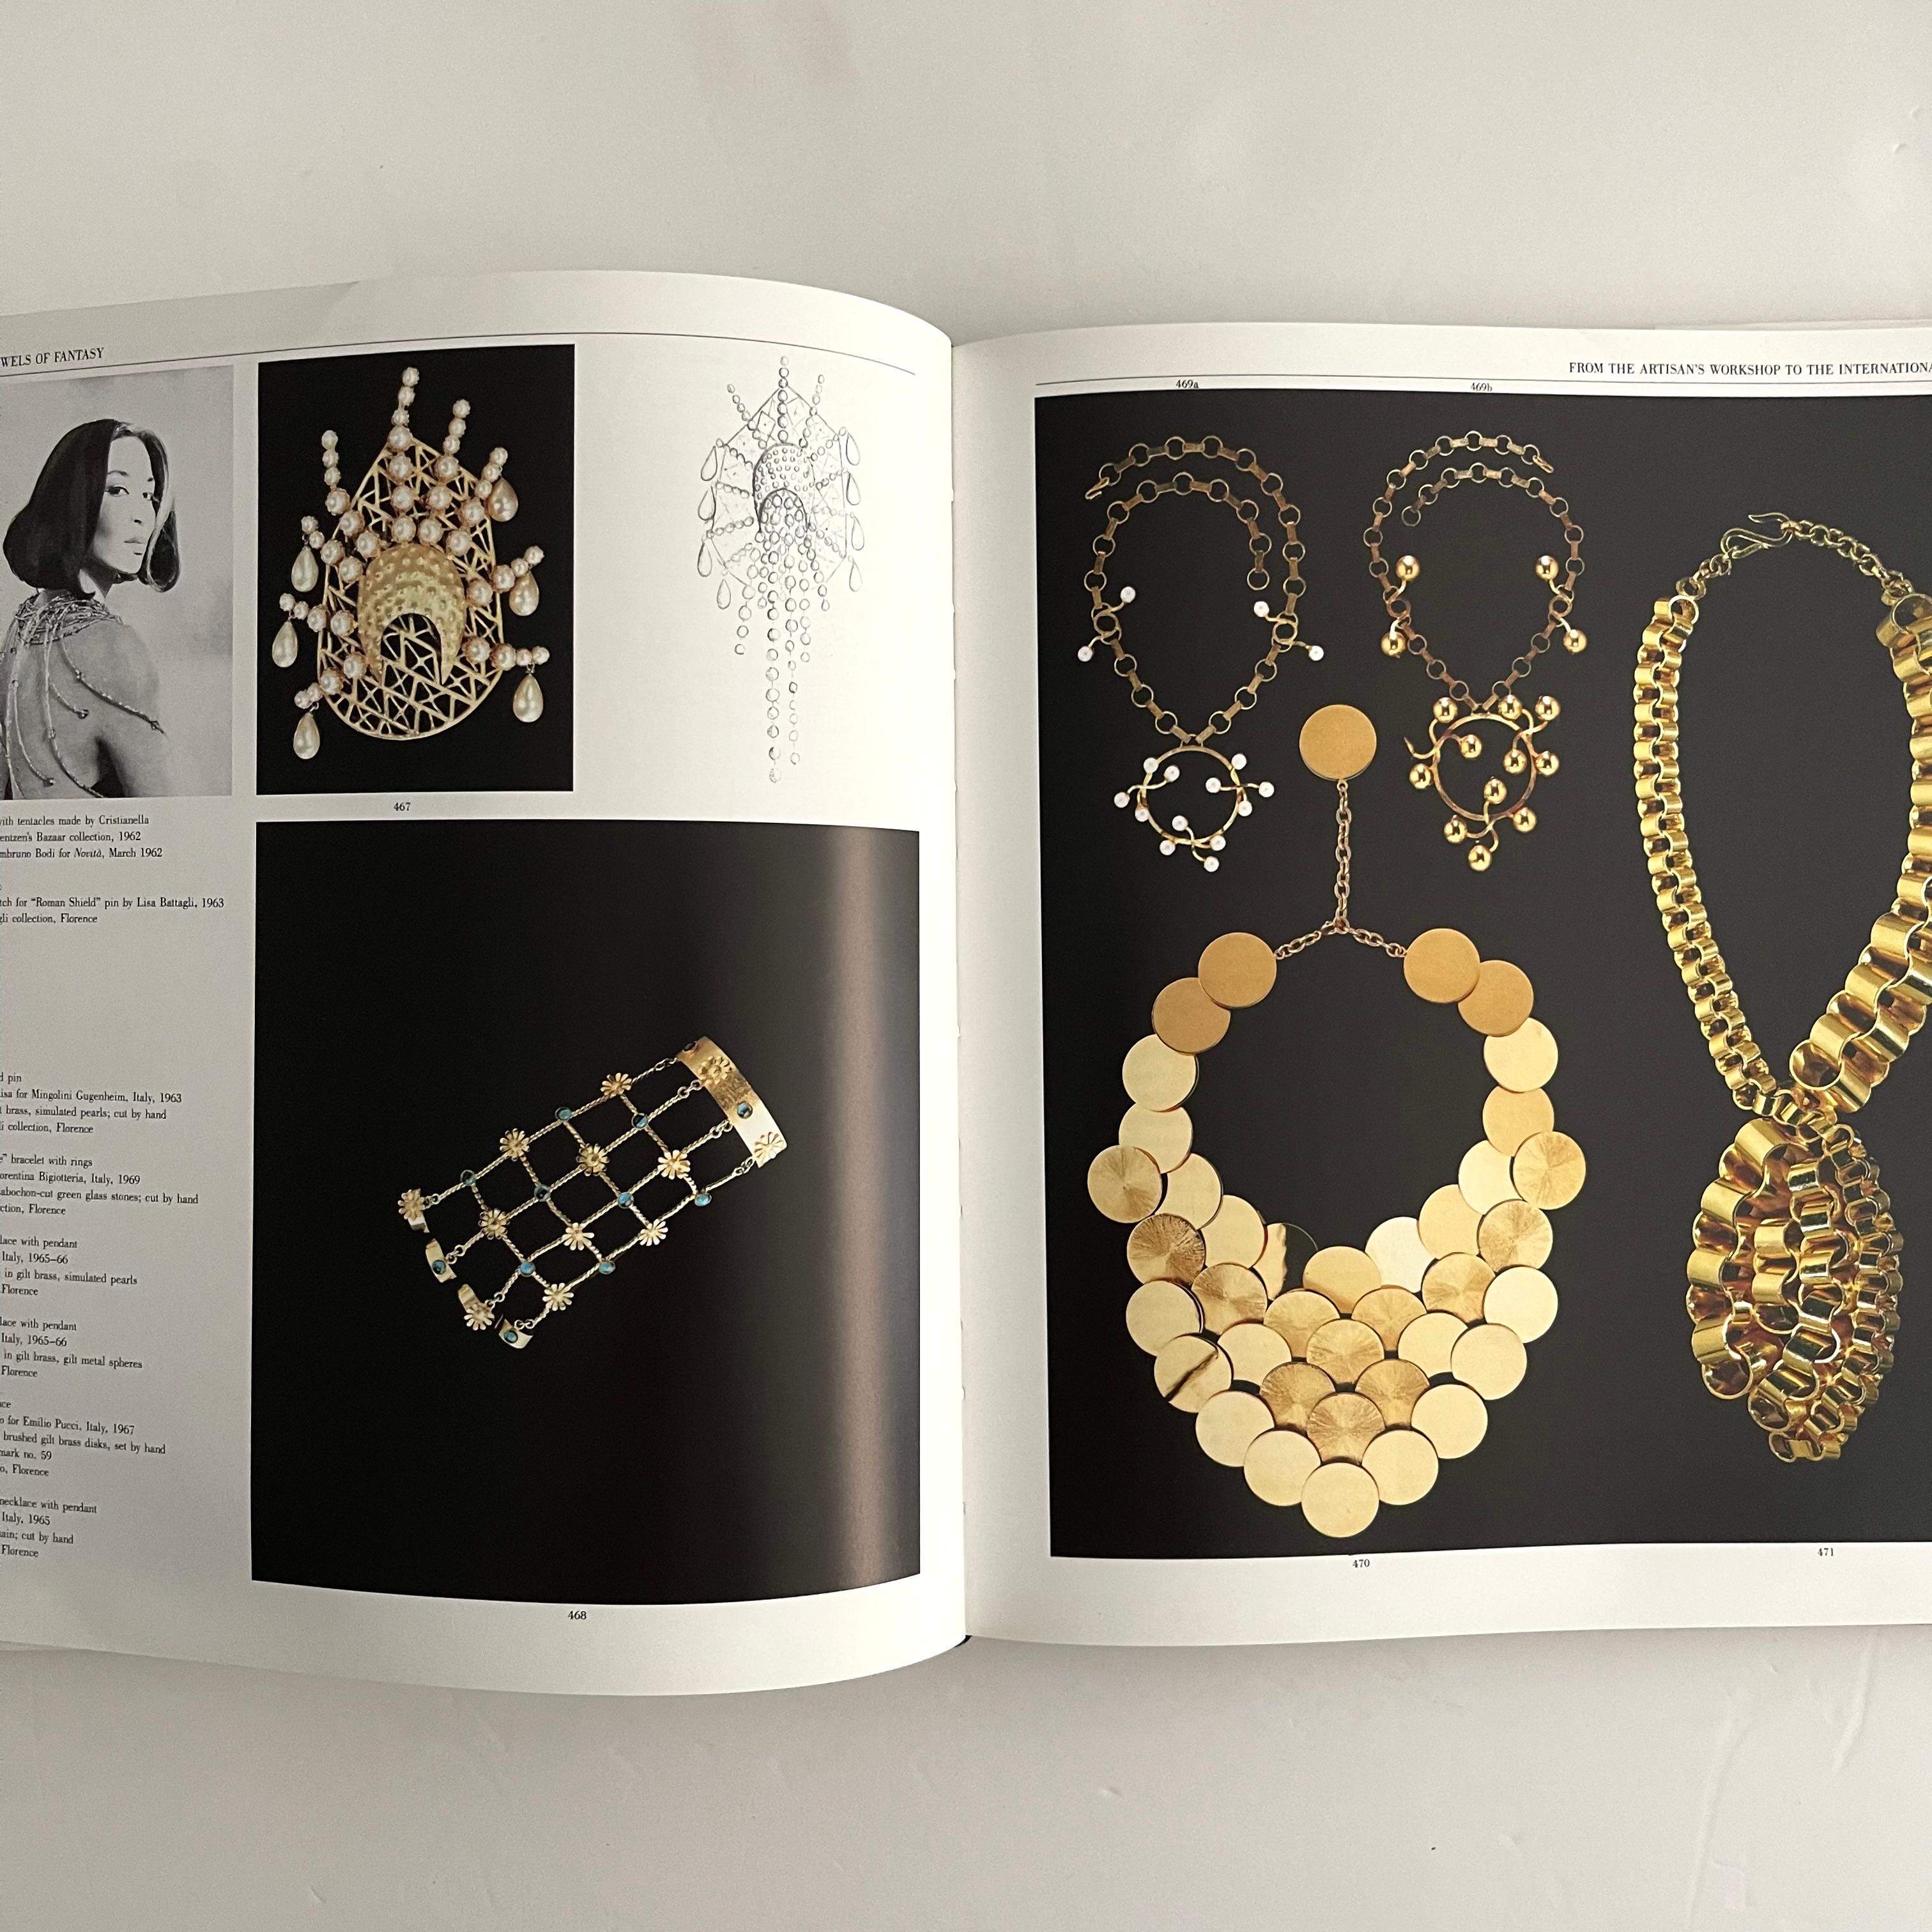 Paper ewels of Fantasy - Costume Jewellery of the 20th Century 1st US ed. 1992